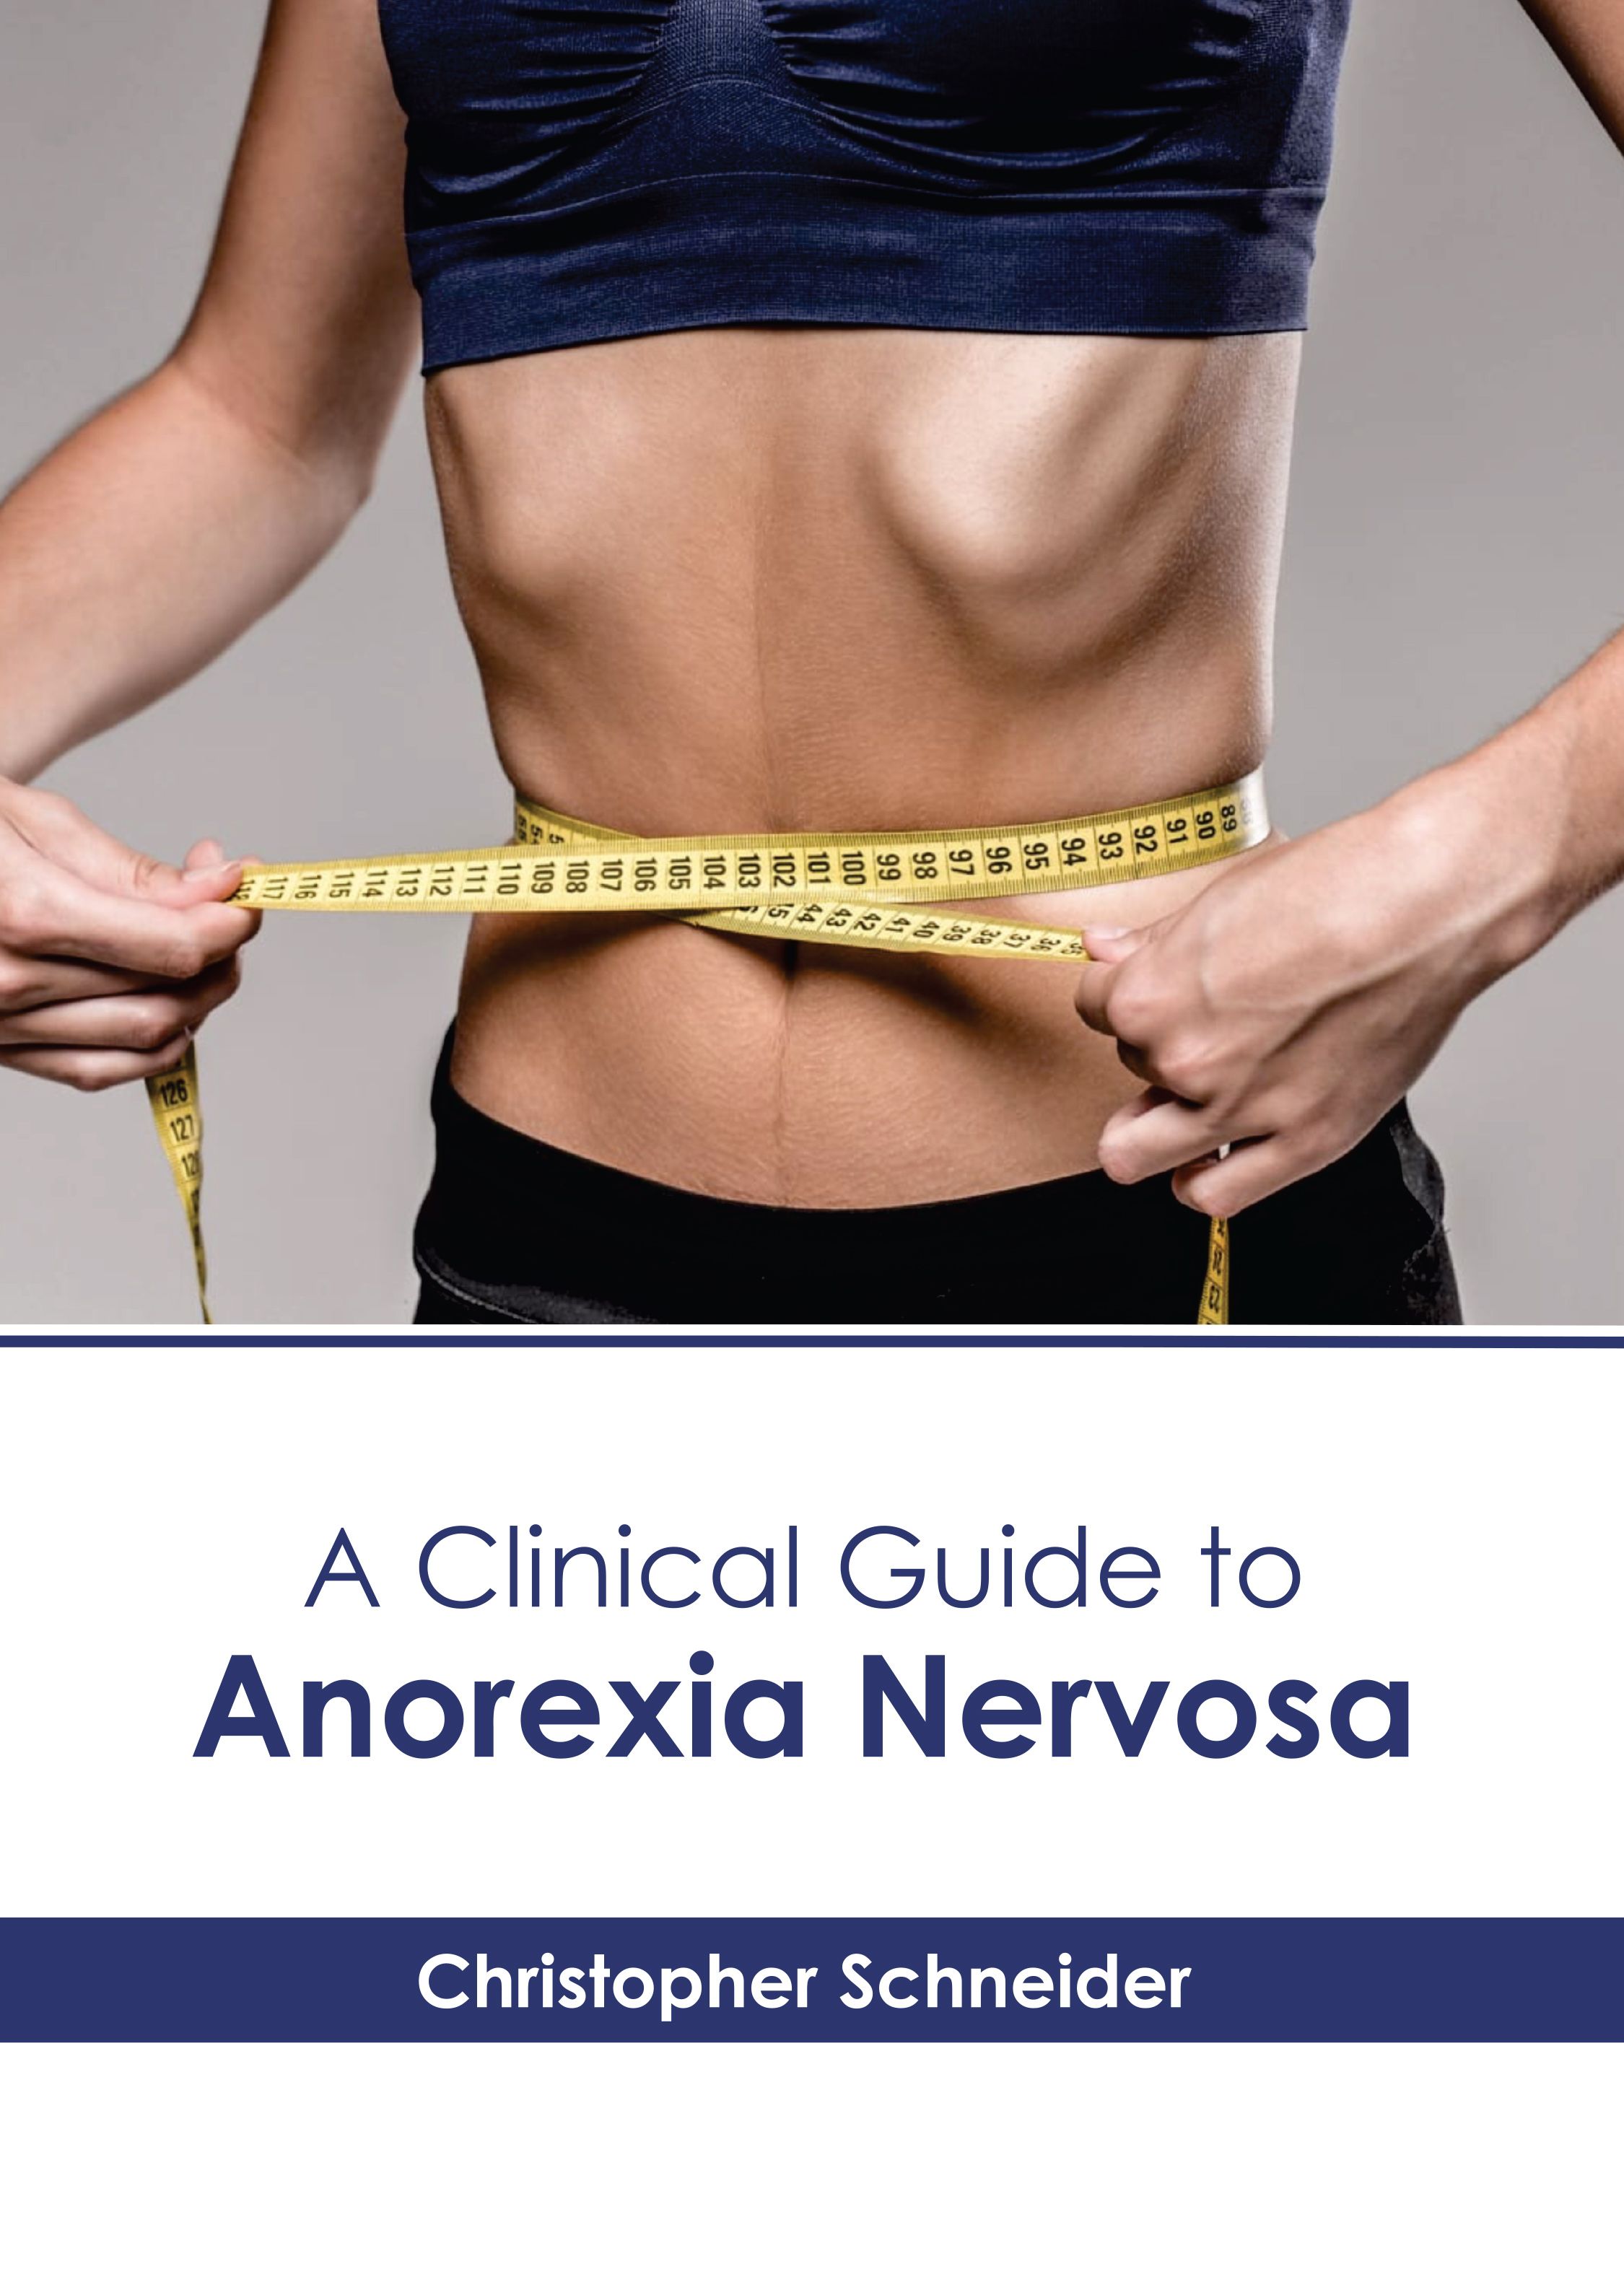 A CLINICAL GUIDE TO ANOREXIA NERVOSA